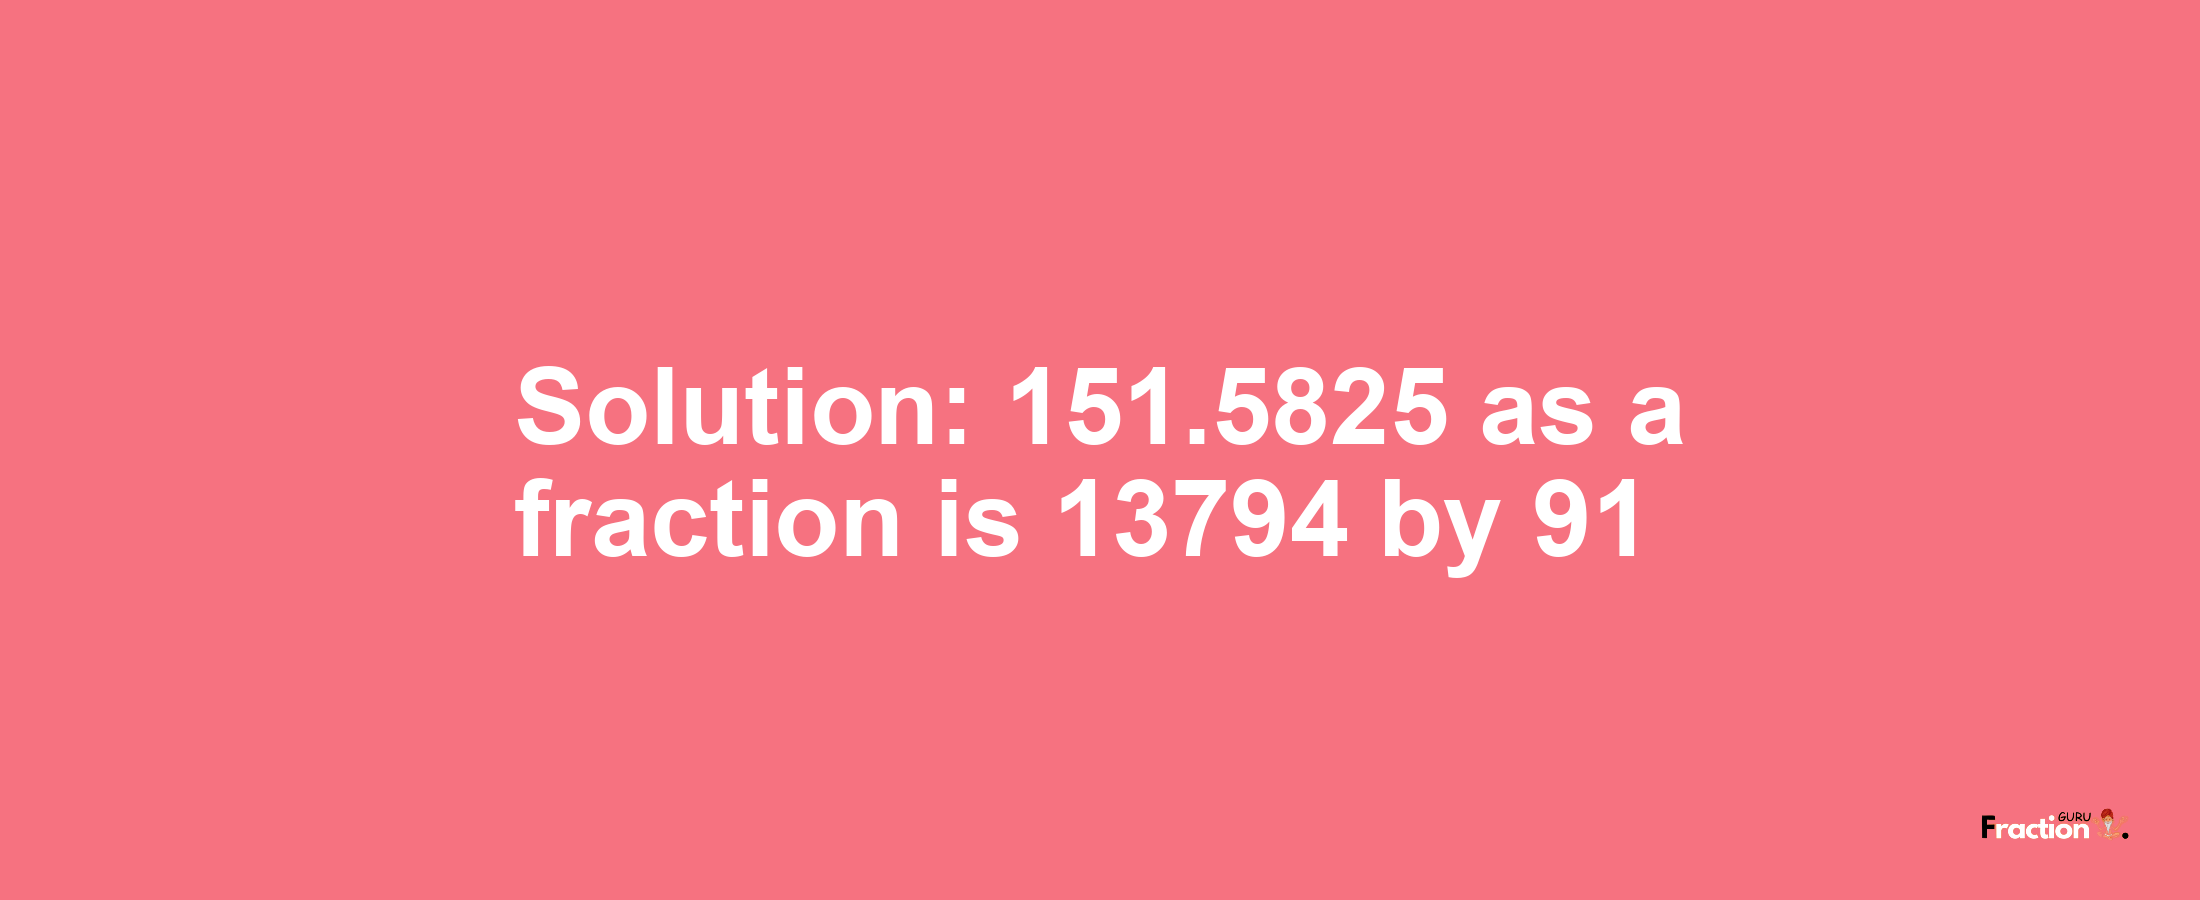 Solution:151.5825 as a fraction is 13794/91